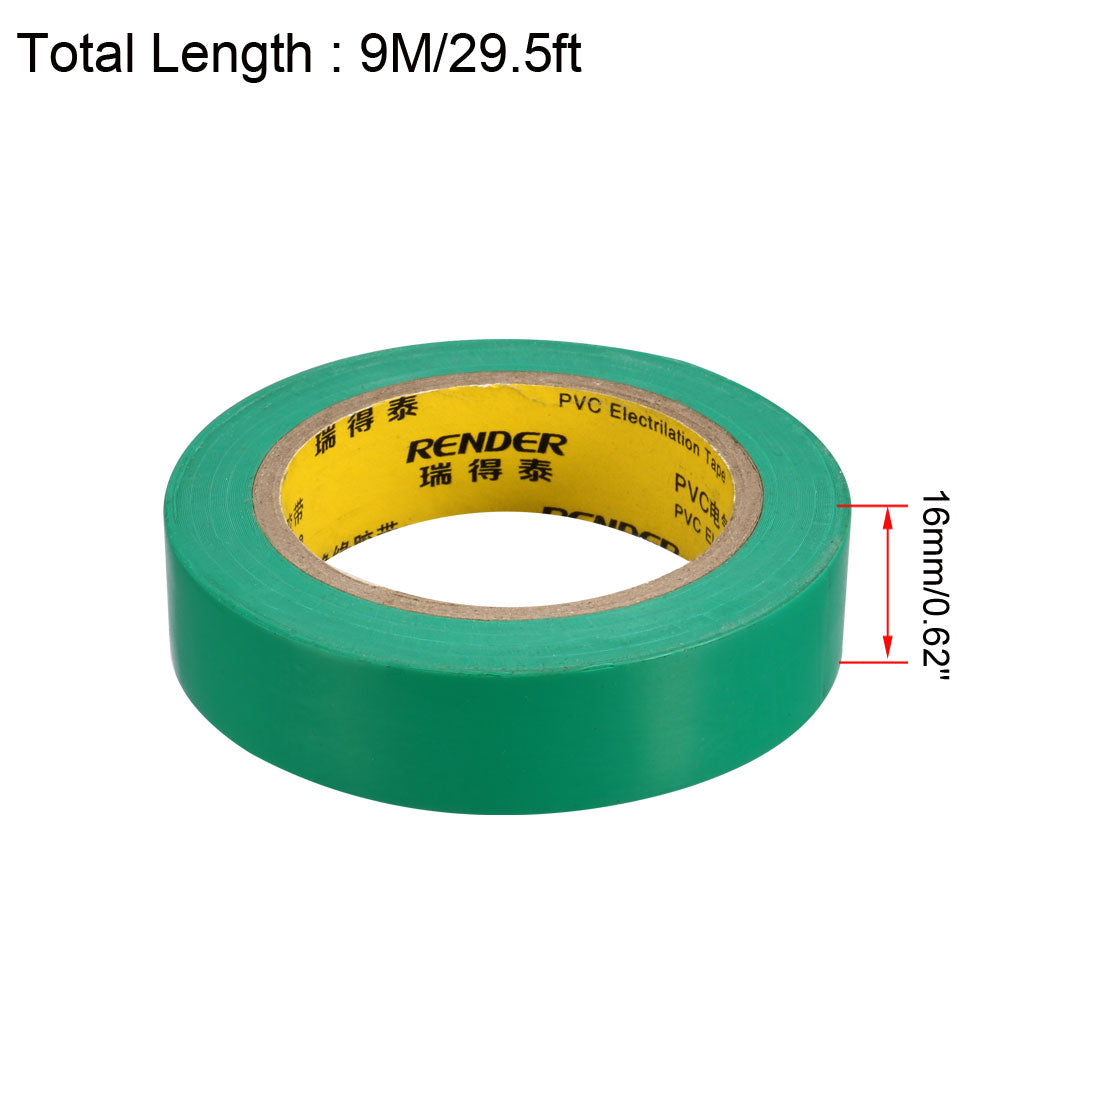 uxcell Uxcell Insulating Tape 16mm Width 9M Long 0.18mm Thick PVC Electrical Tape Green 2pcs